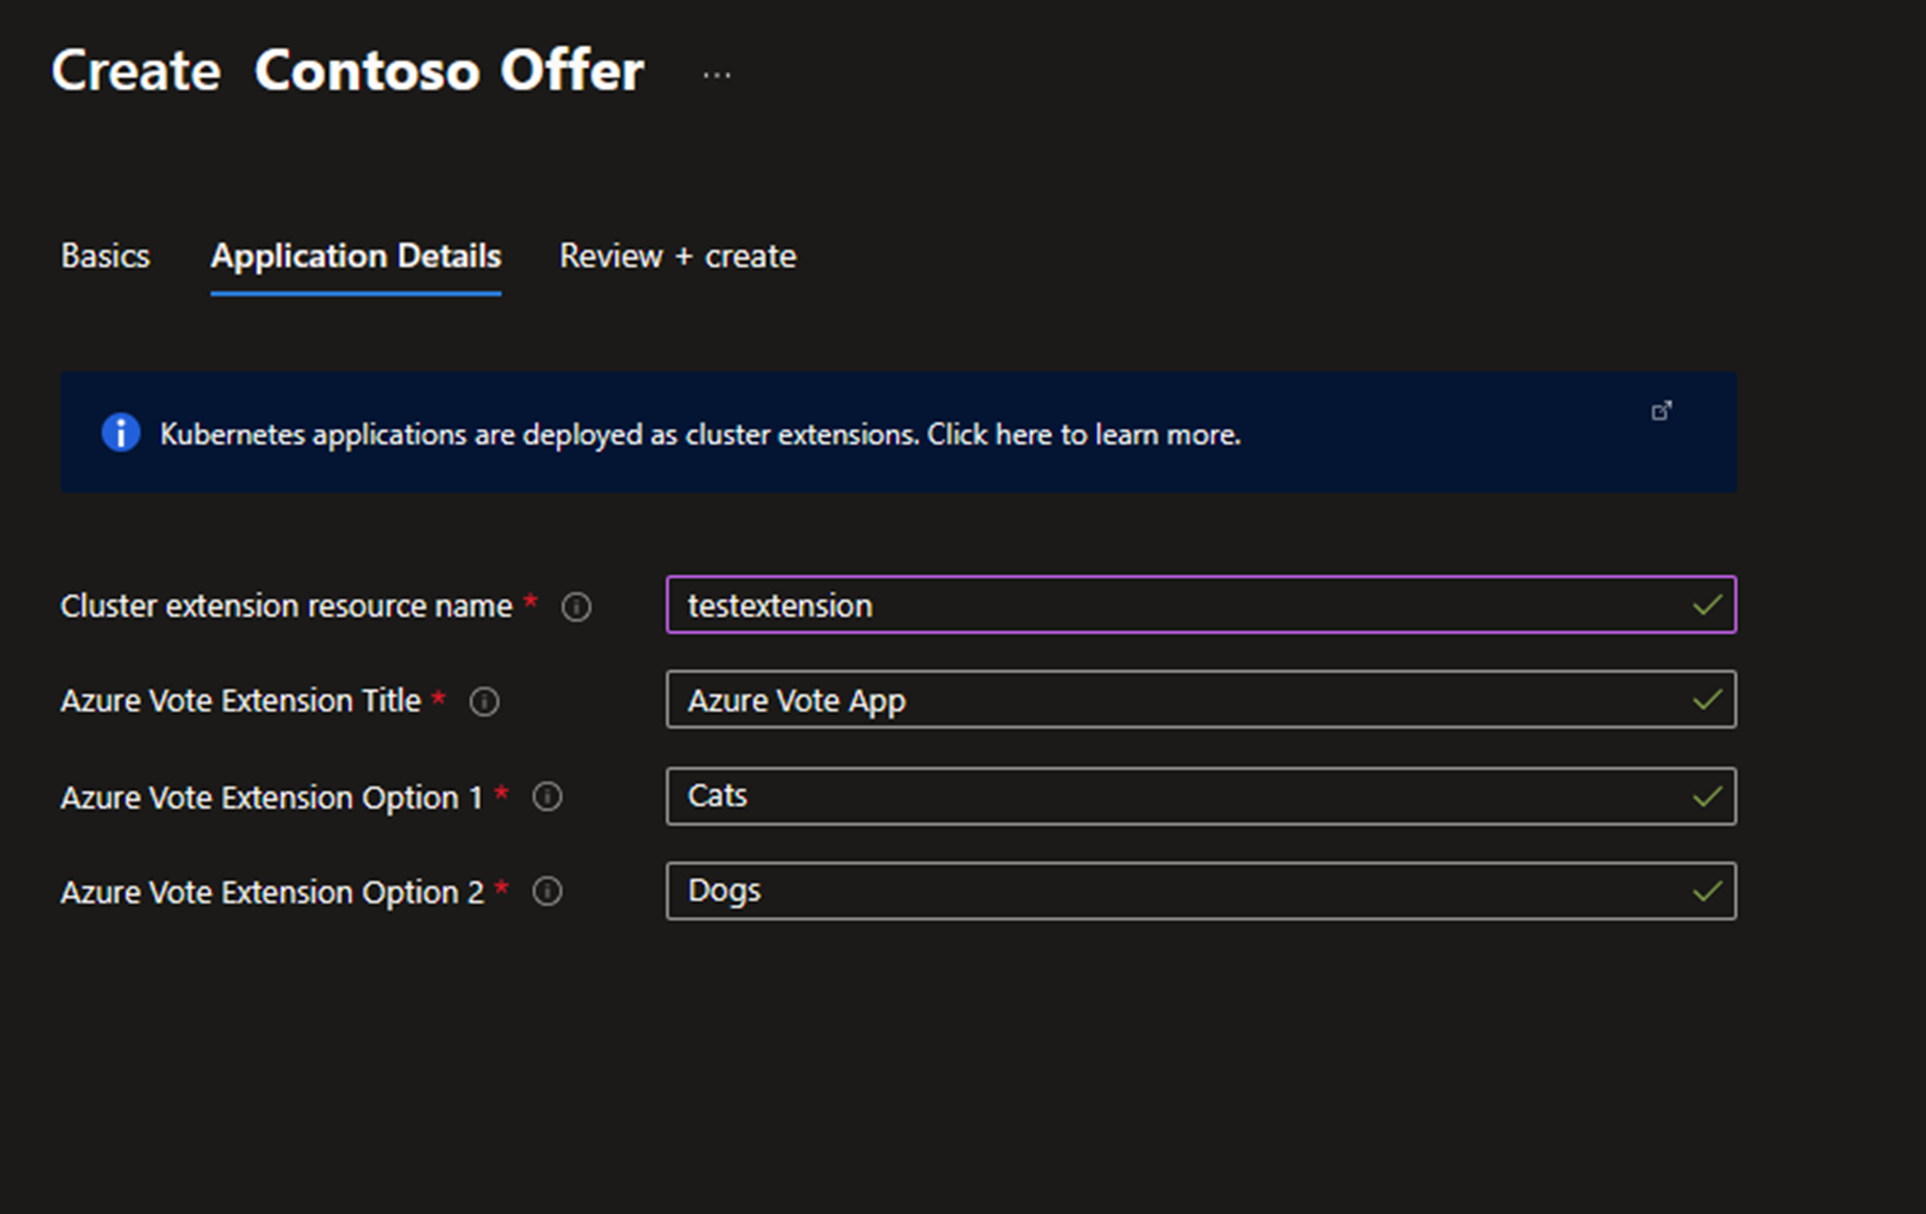 Screenshot showing configuration options for an Azure Marketplace offer.